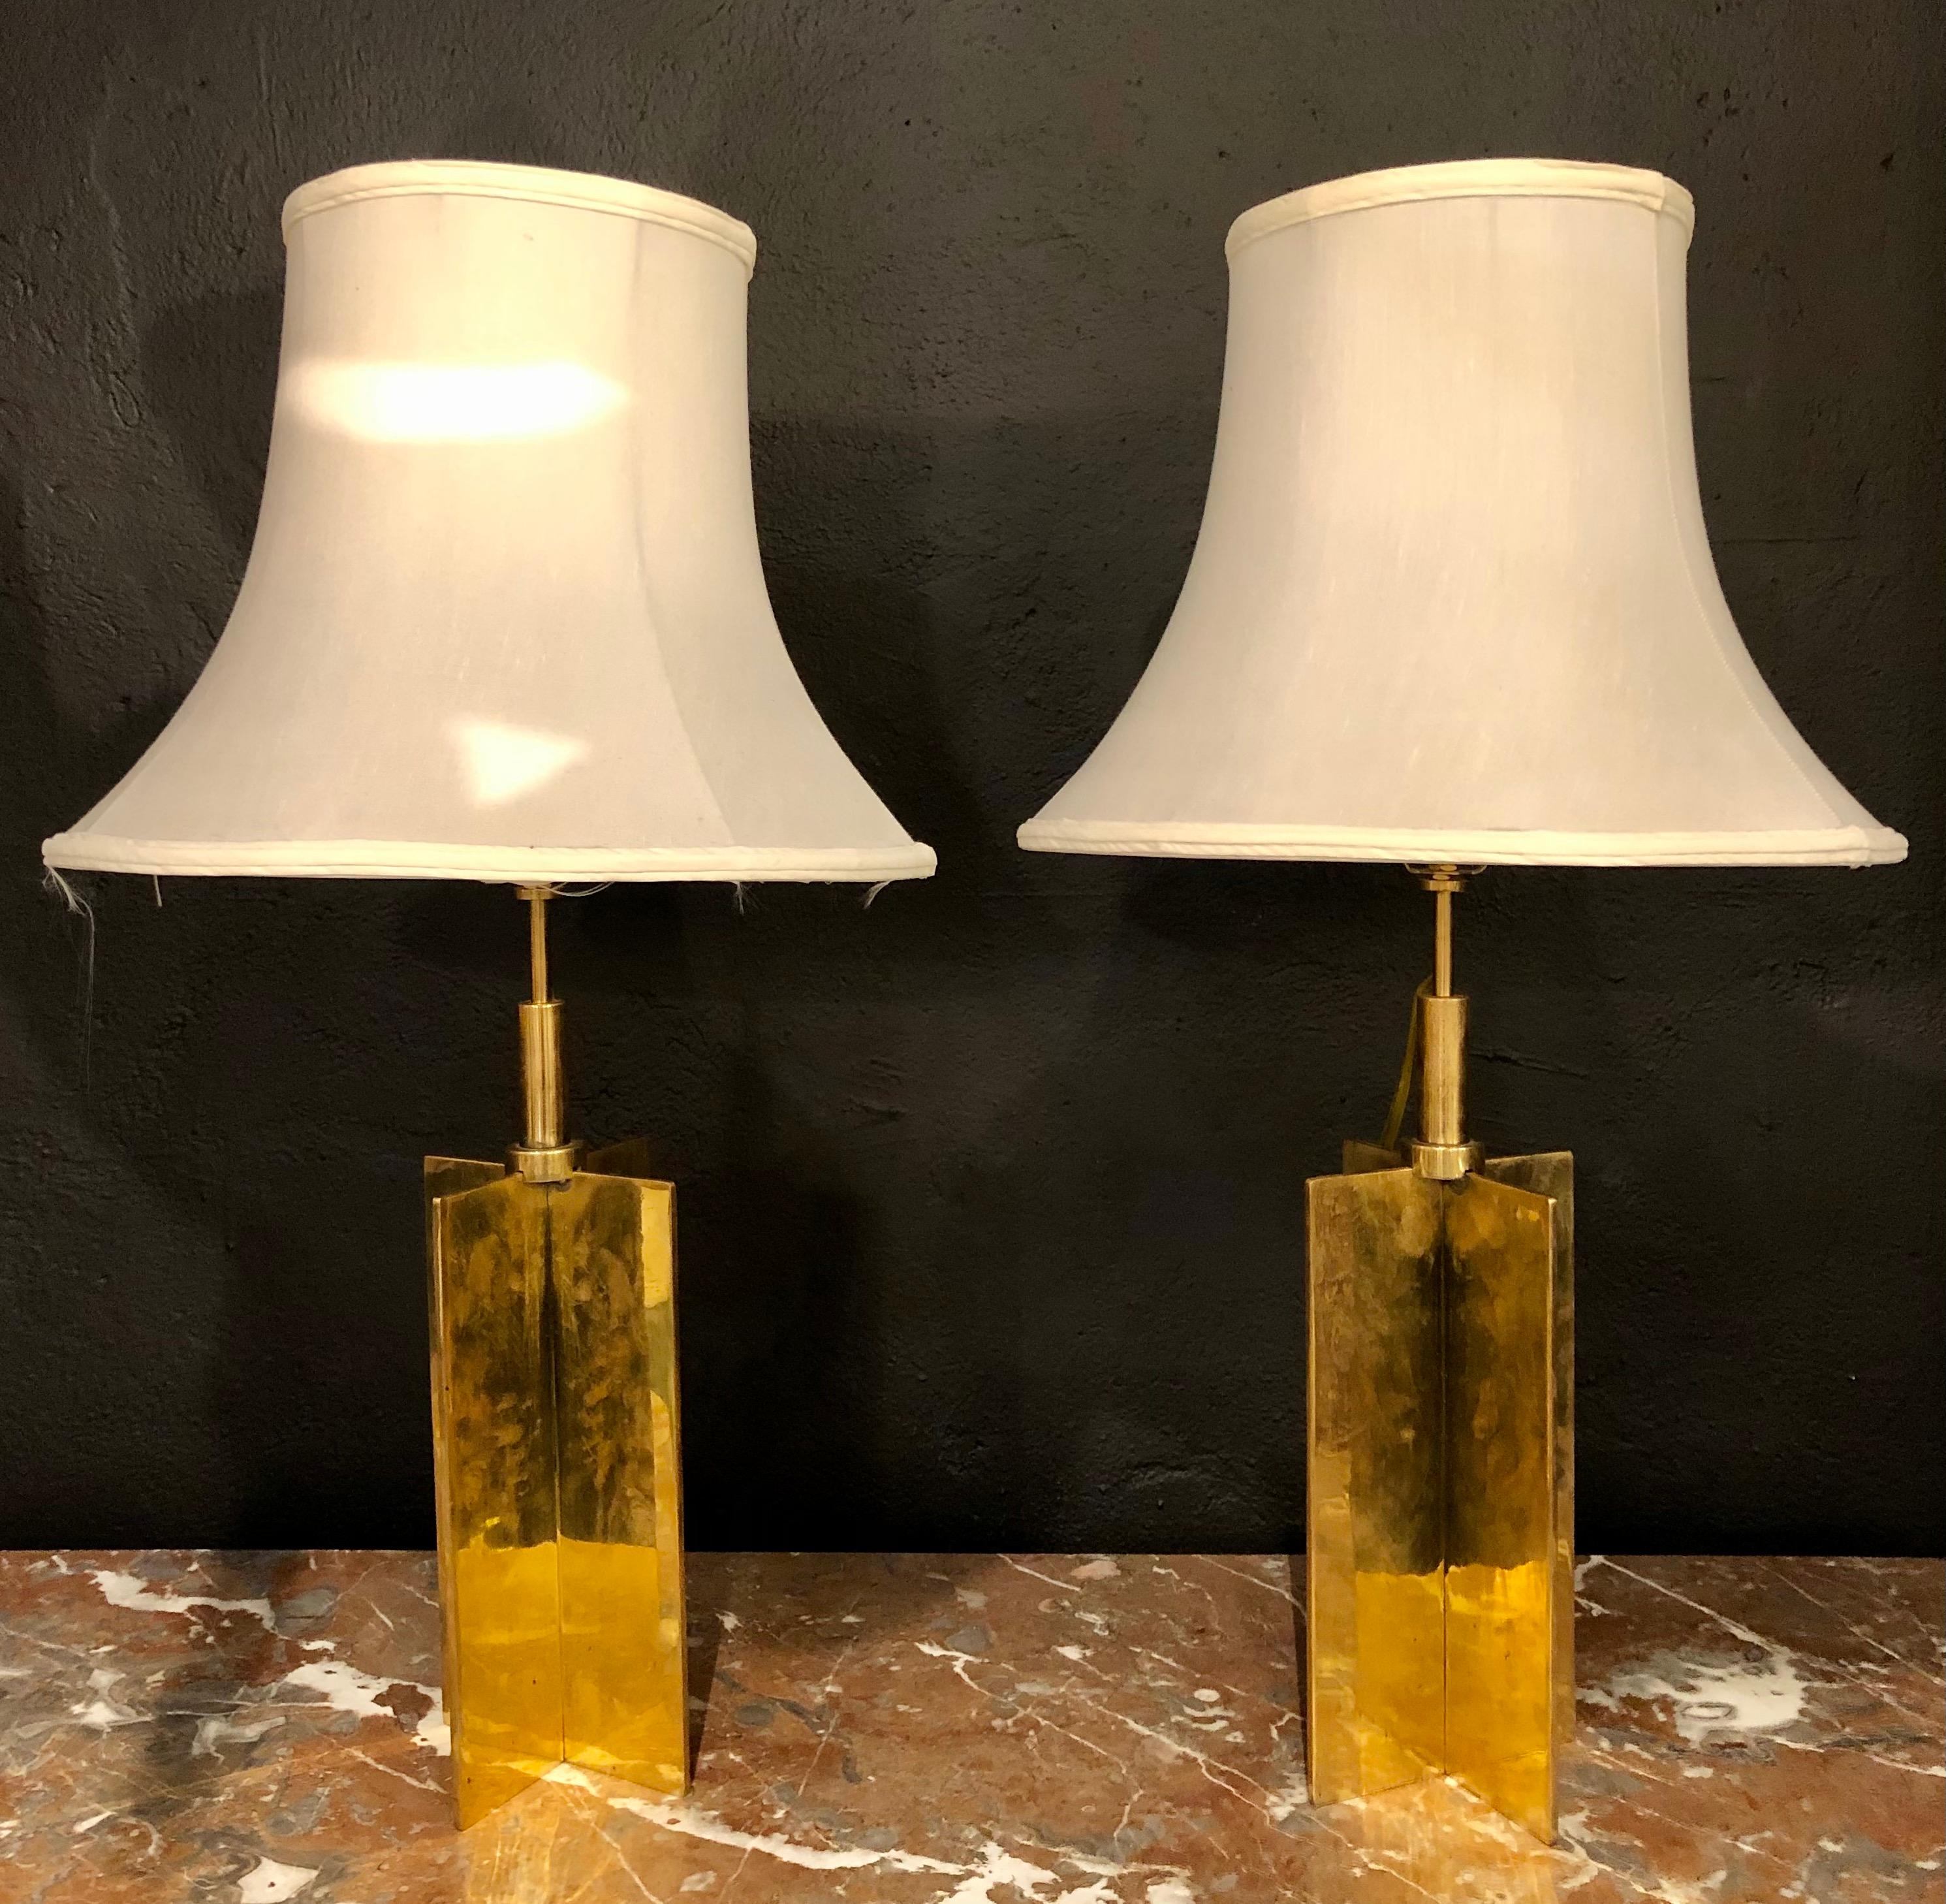 Pair of custom Croisillion lamps in The Jean Michel Frank Manner. These solid bronze X-form table lamps are simply stunning. The sleek and simplistic form reminiscent of a pair by Frank. Each take a single sixty watt light bulb. The pair come